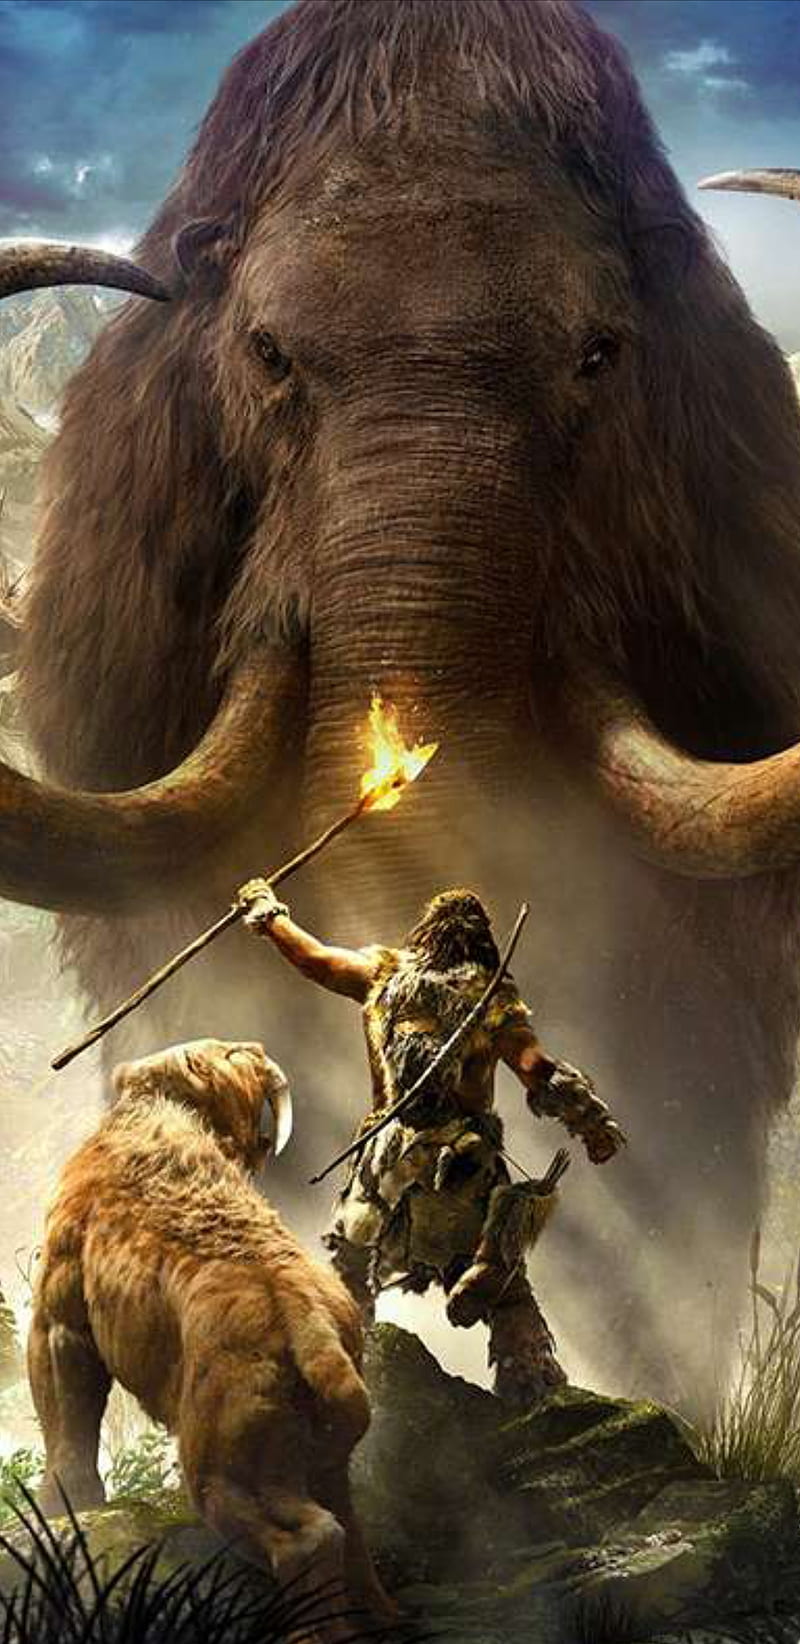 far cry primal pc or ps4